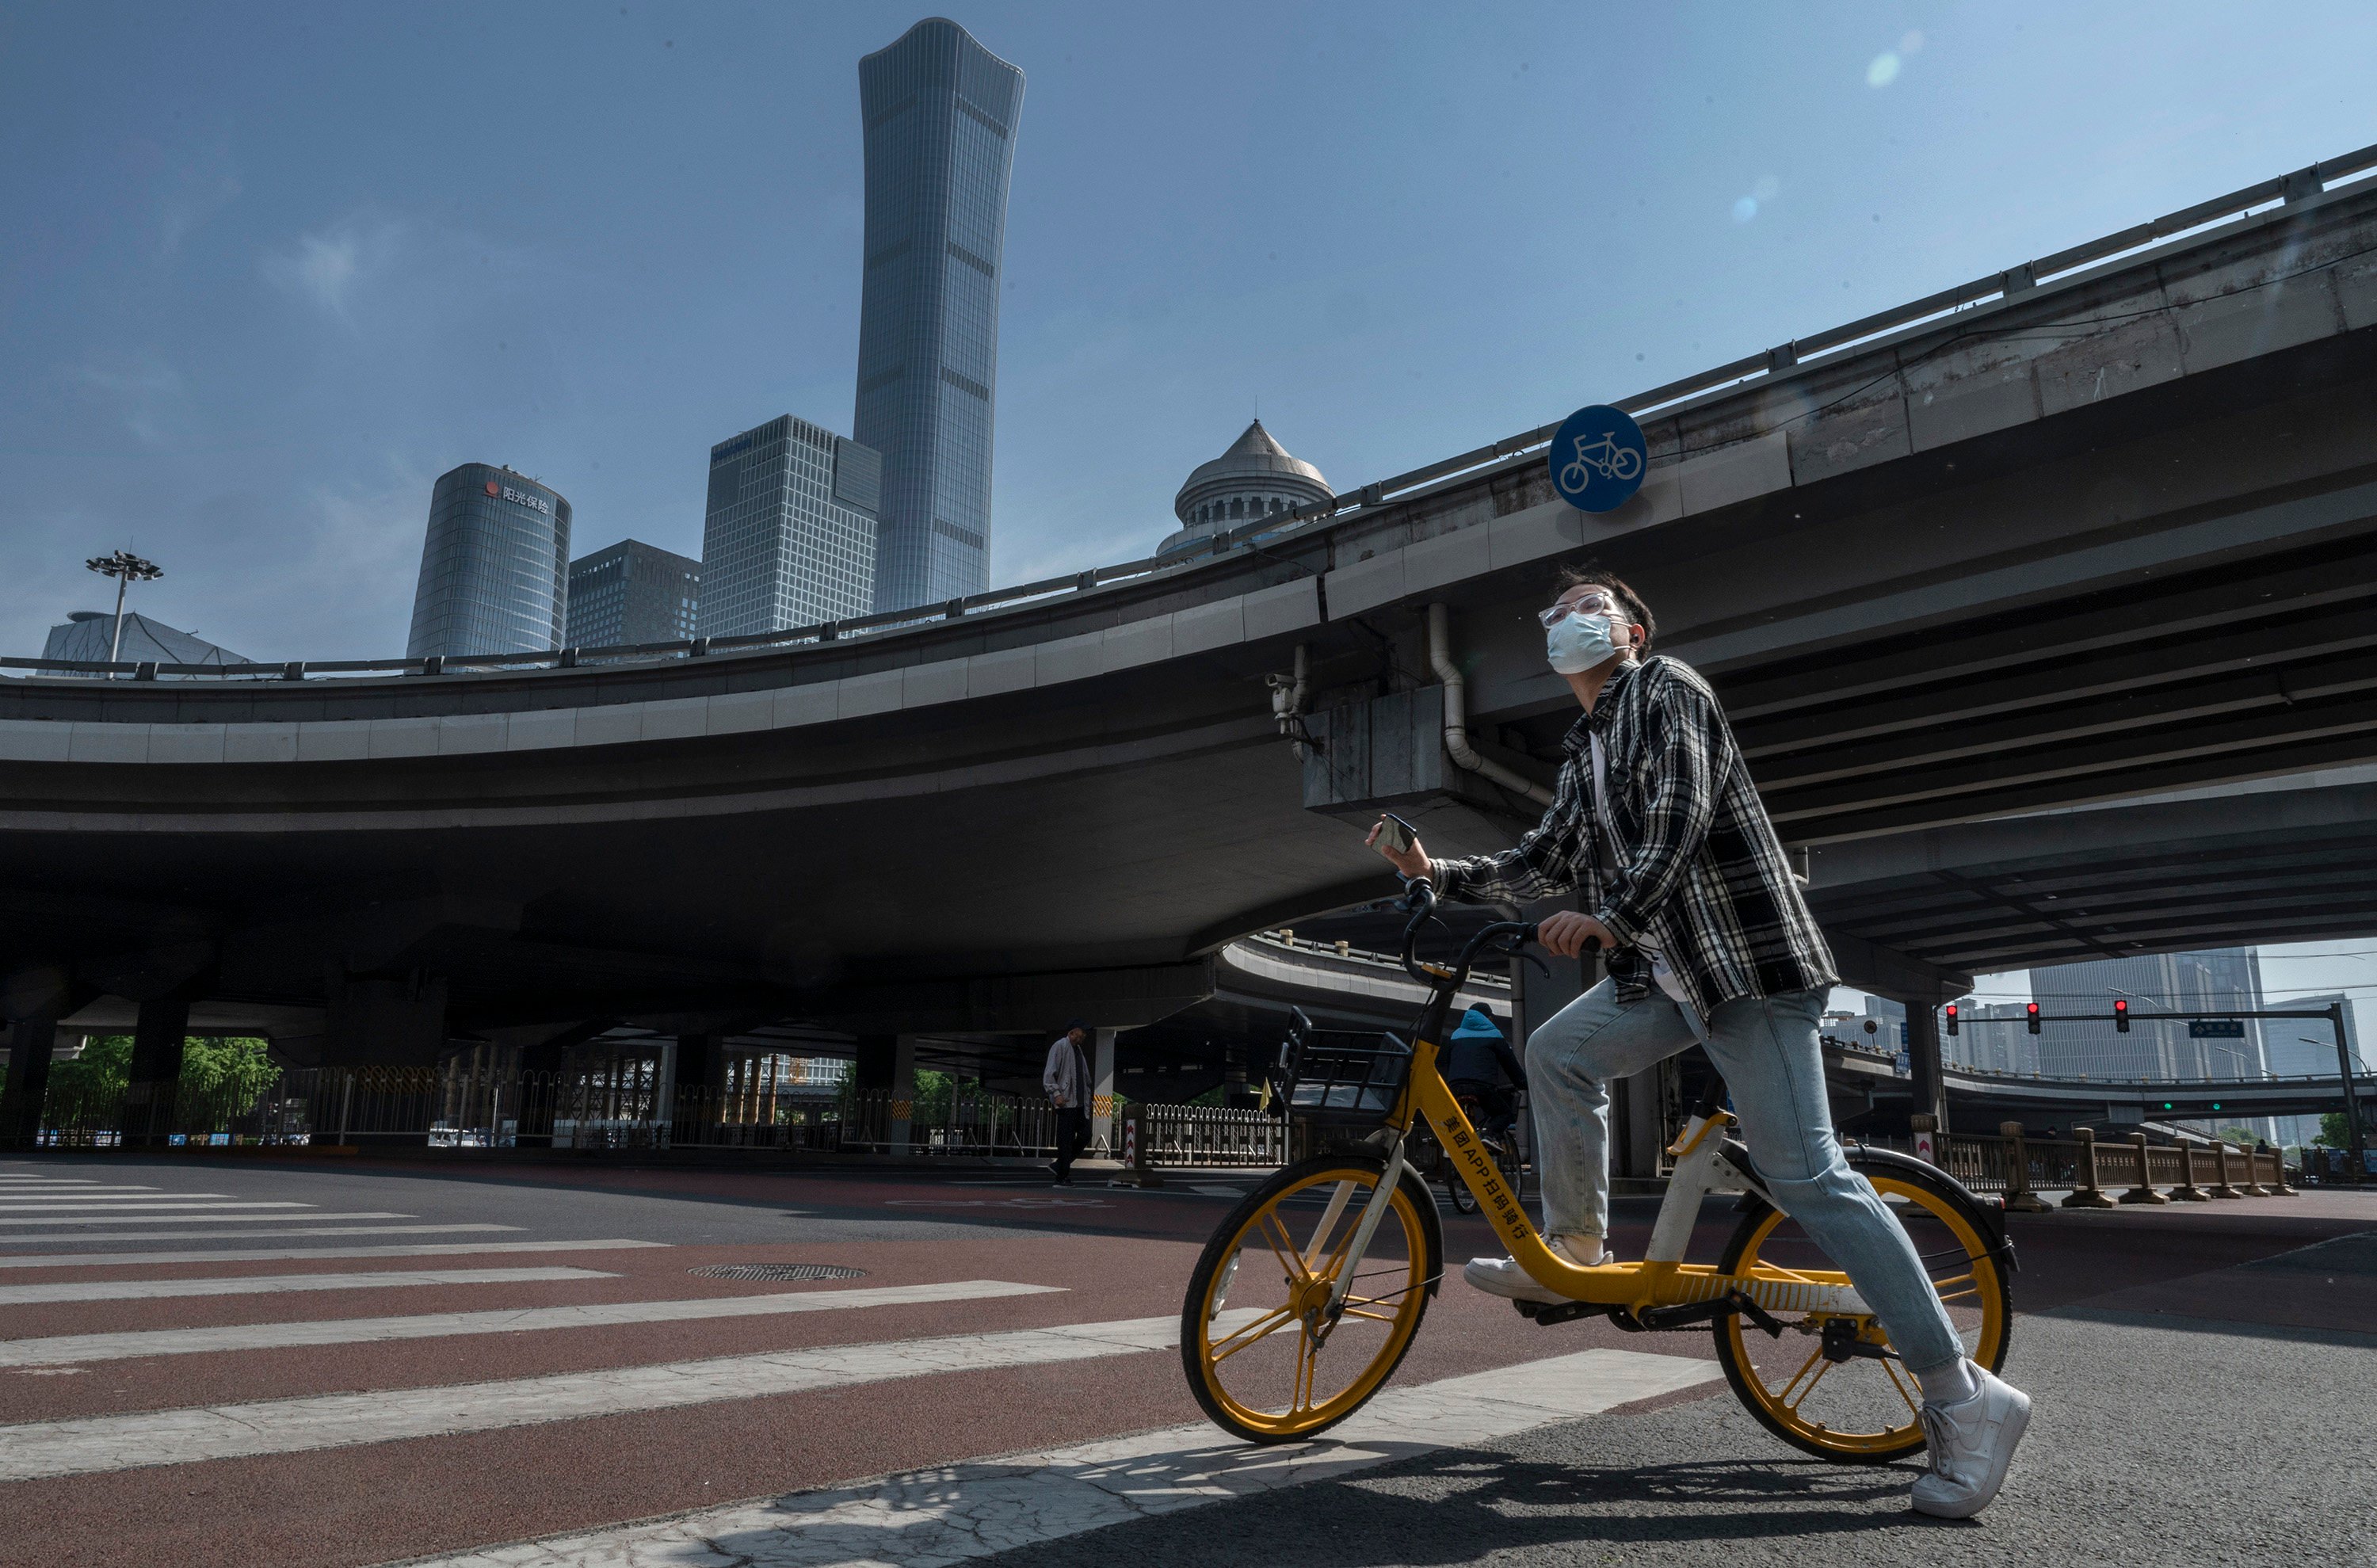 A cyclist stops at a quiet intersection in Beijing’s Central Business District, after the government recommended people work from home to prevent the spread of Covid-19, on May 5. Photo: Getty Images/TNS